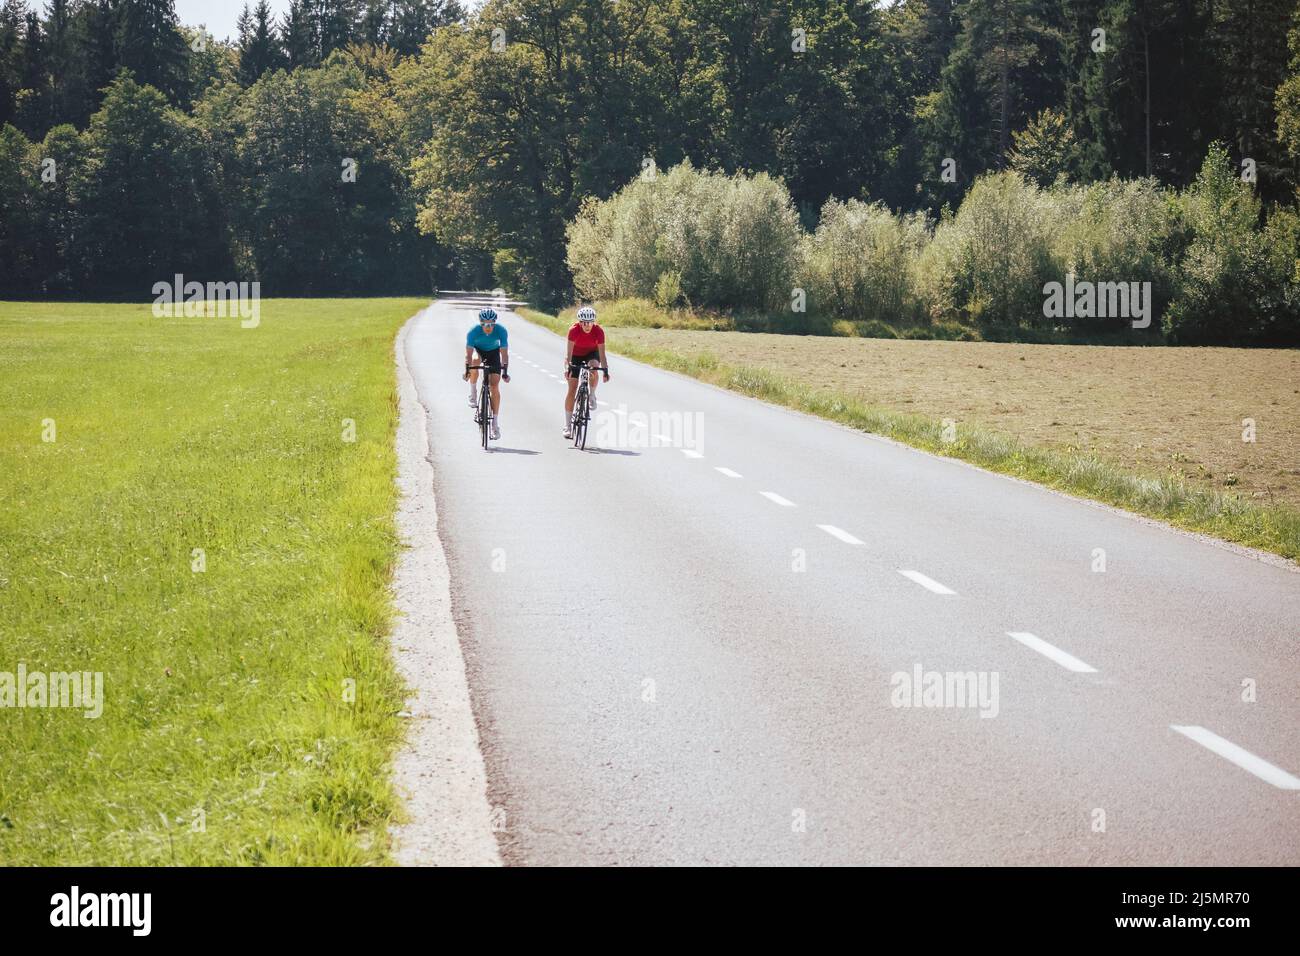 Cyclists couple on the road in summer cycling gear pedaling and gliding positions on racing cycles. Stock Photo